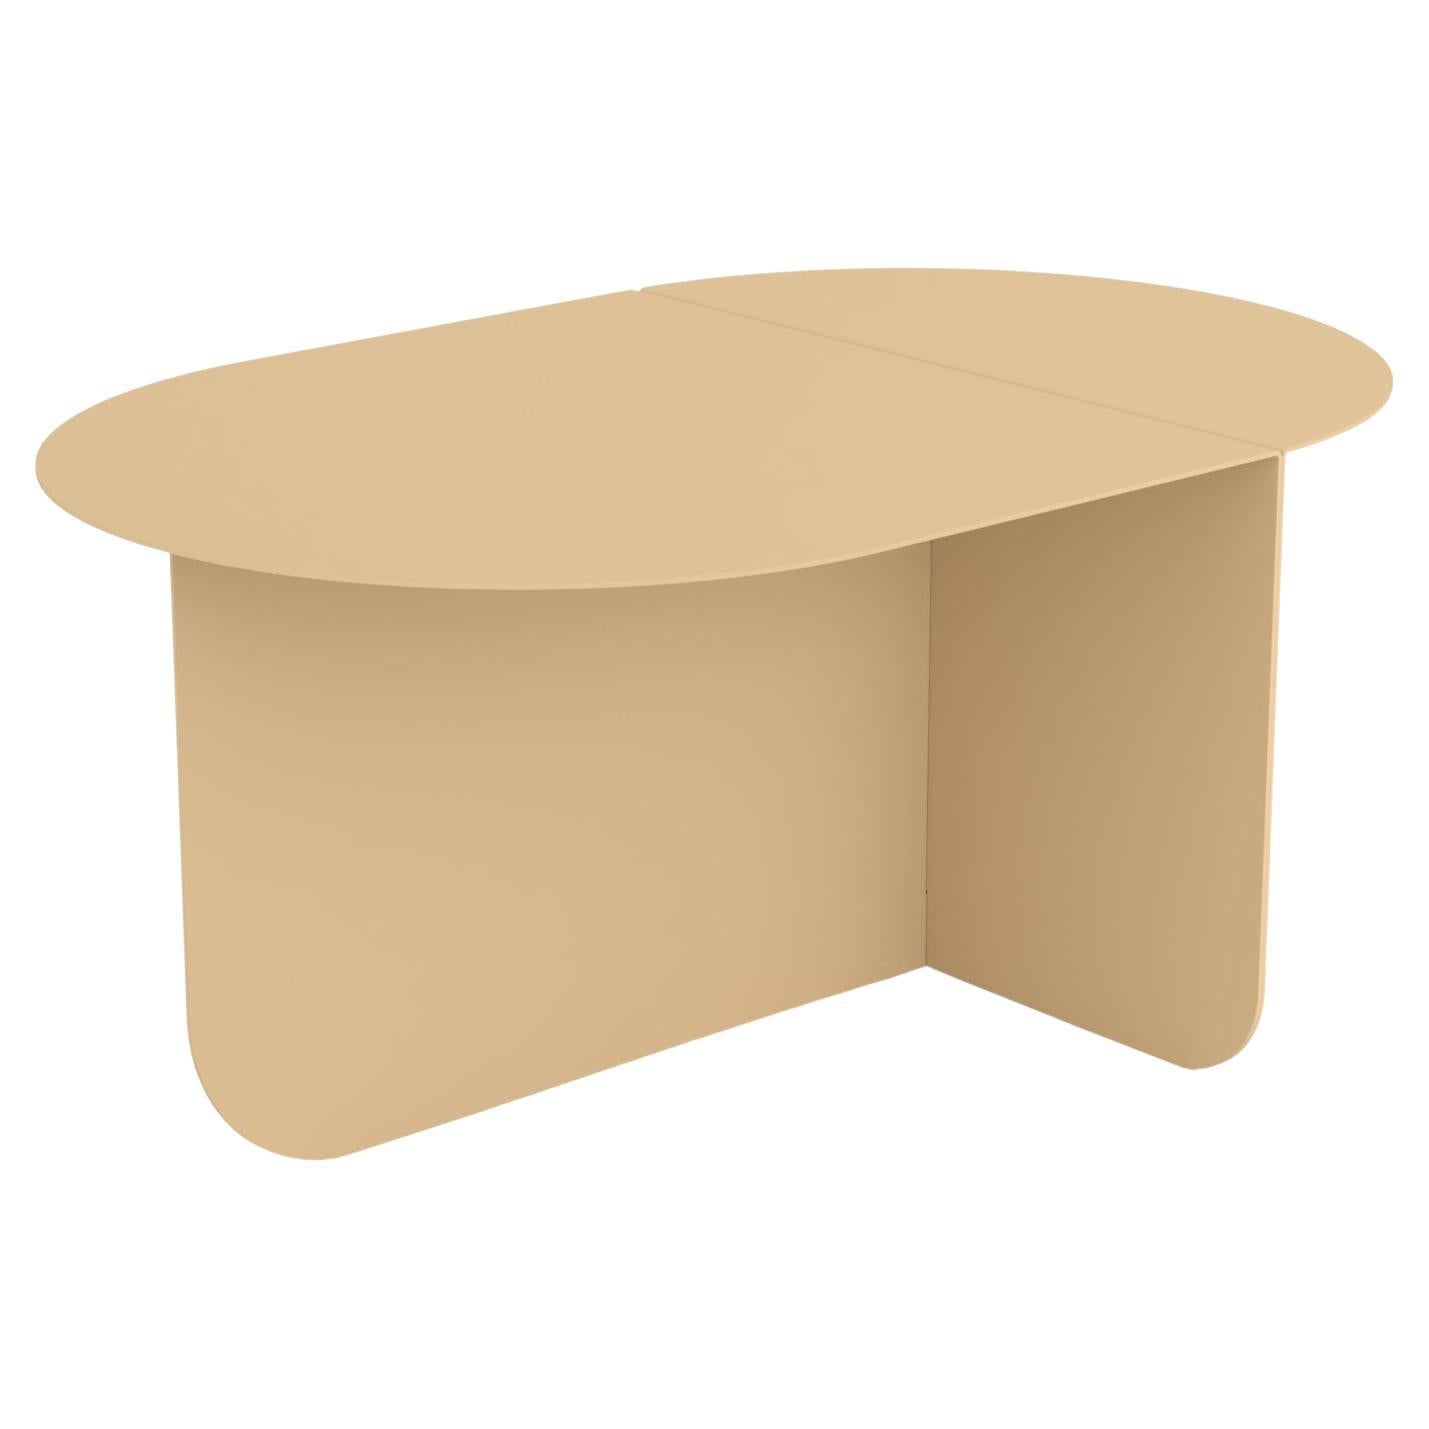 Colour, a Modern Oval Coffee Table, Ral 1001 - Beige, by Bas Vellekoop For Sale